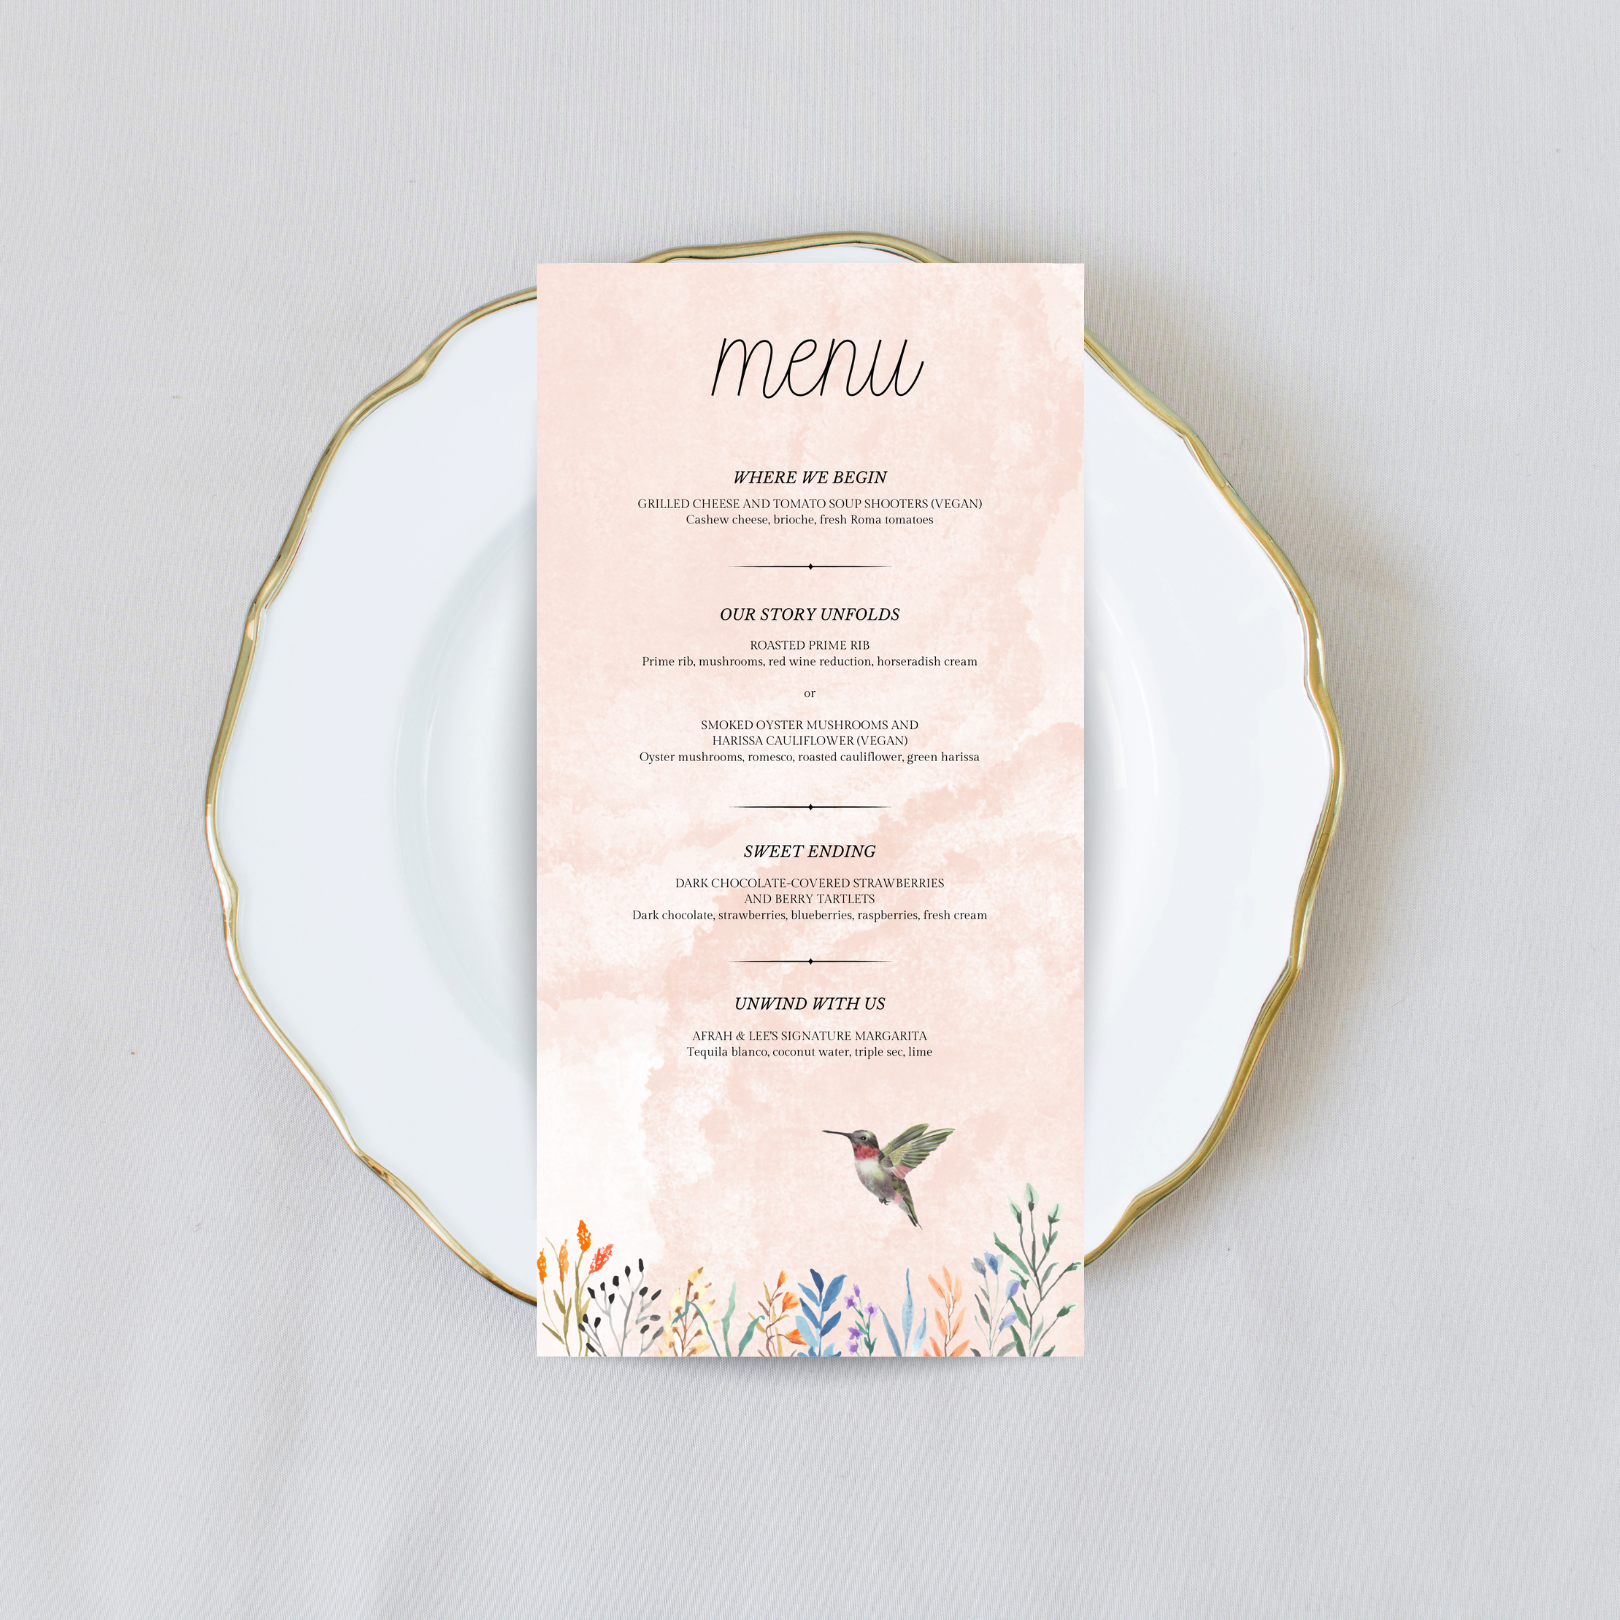 A light pink wedding menu with flowers and a hummingbird at the bottom sits on a white plate with gold trim against a cream coloured background.